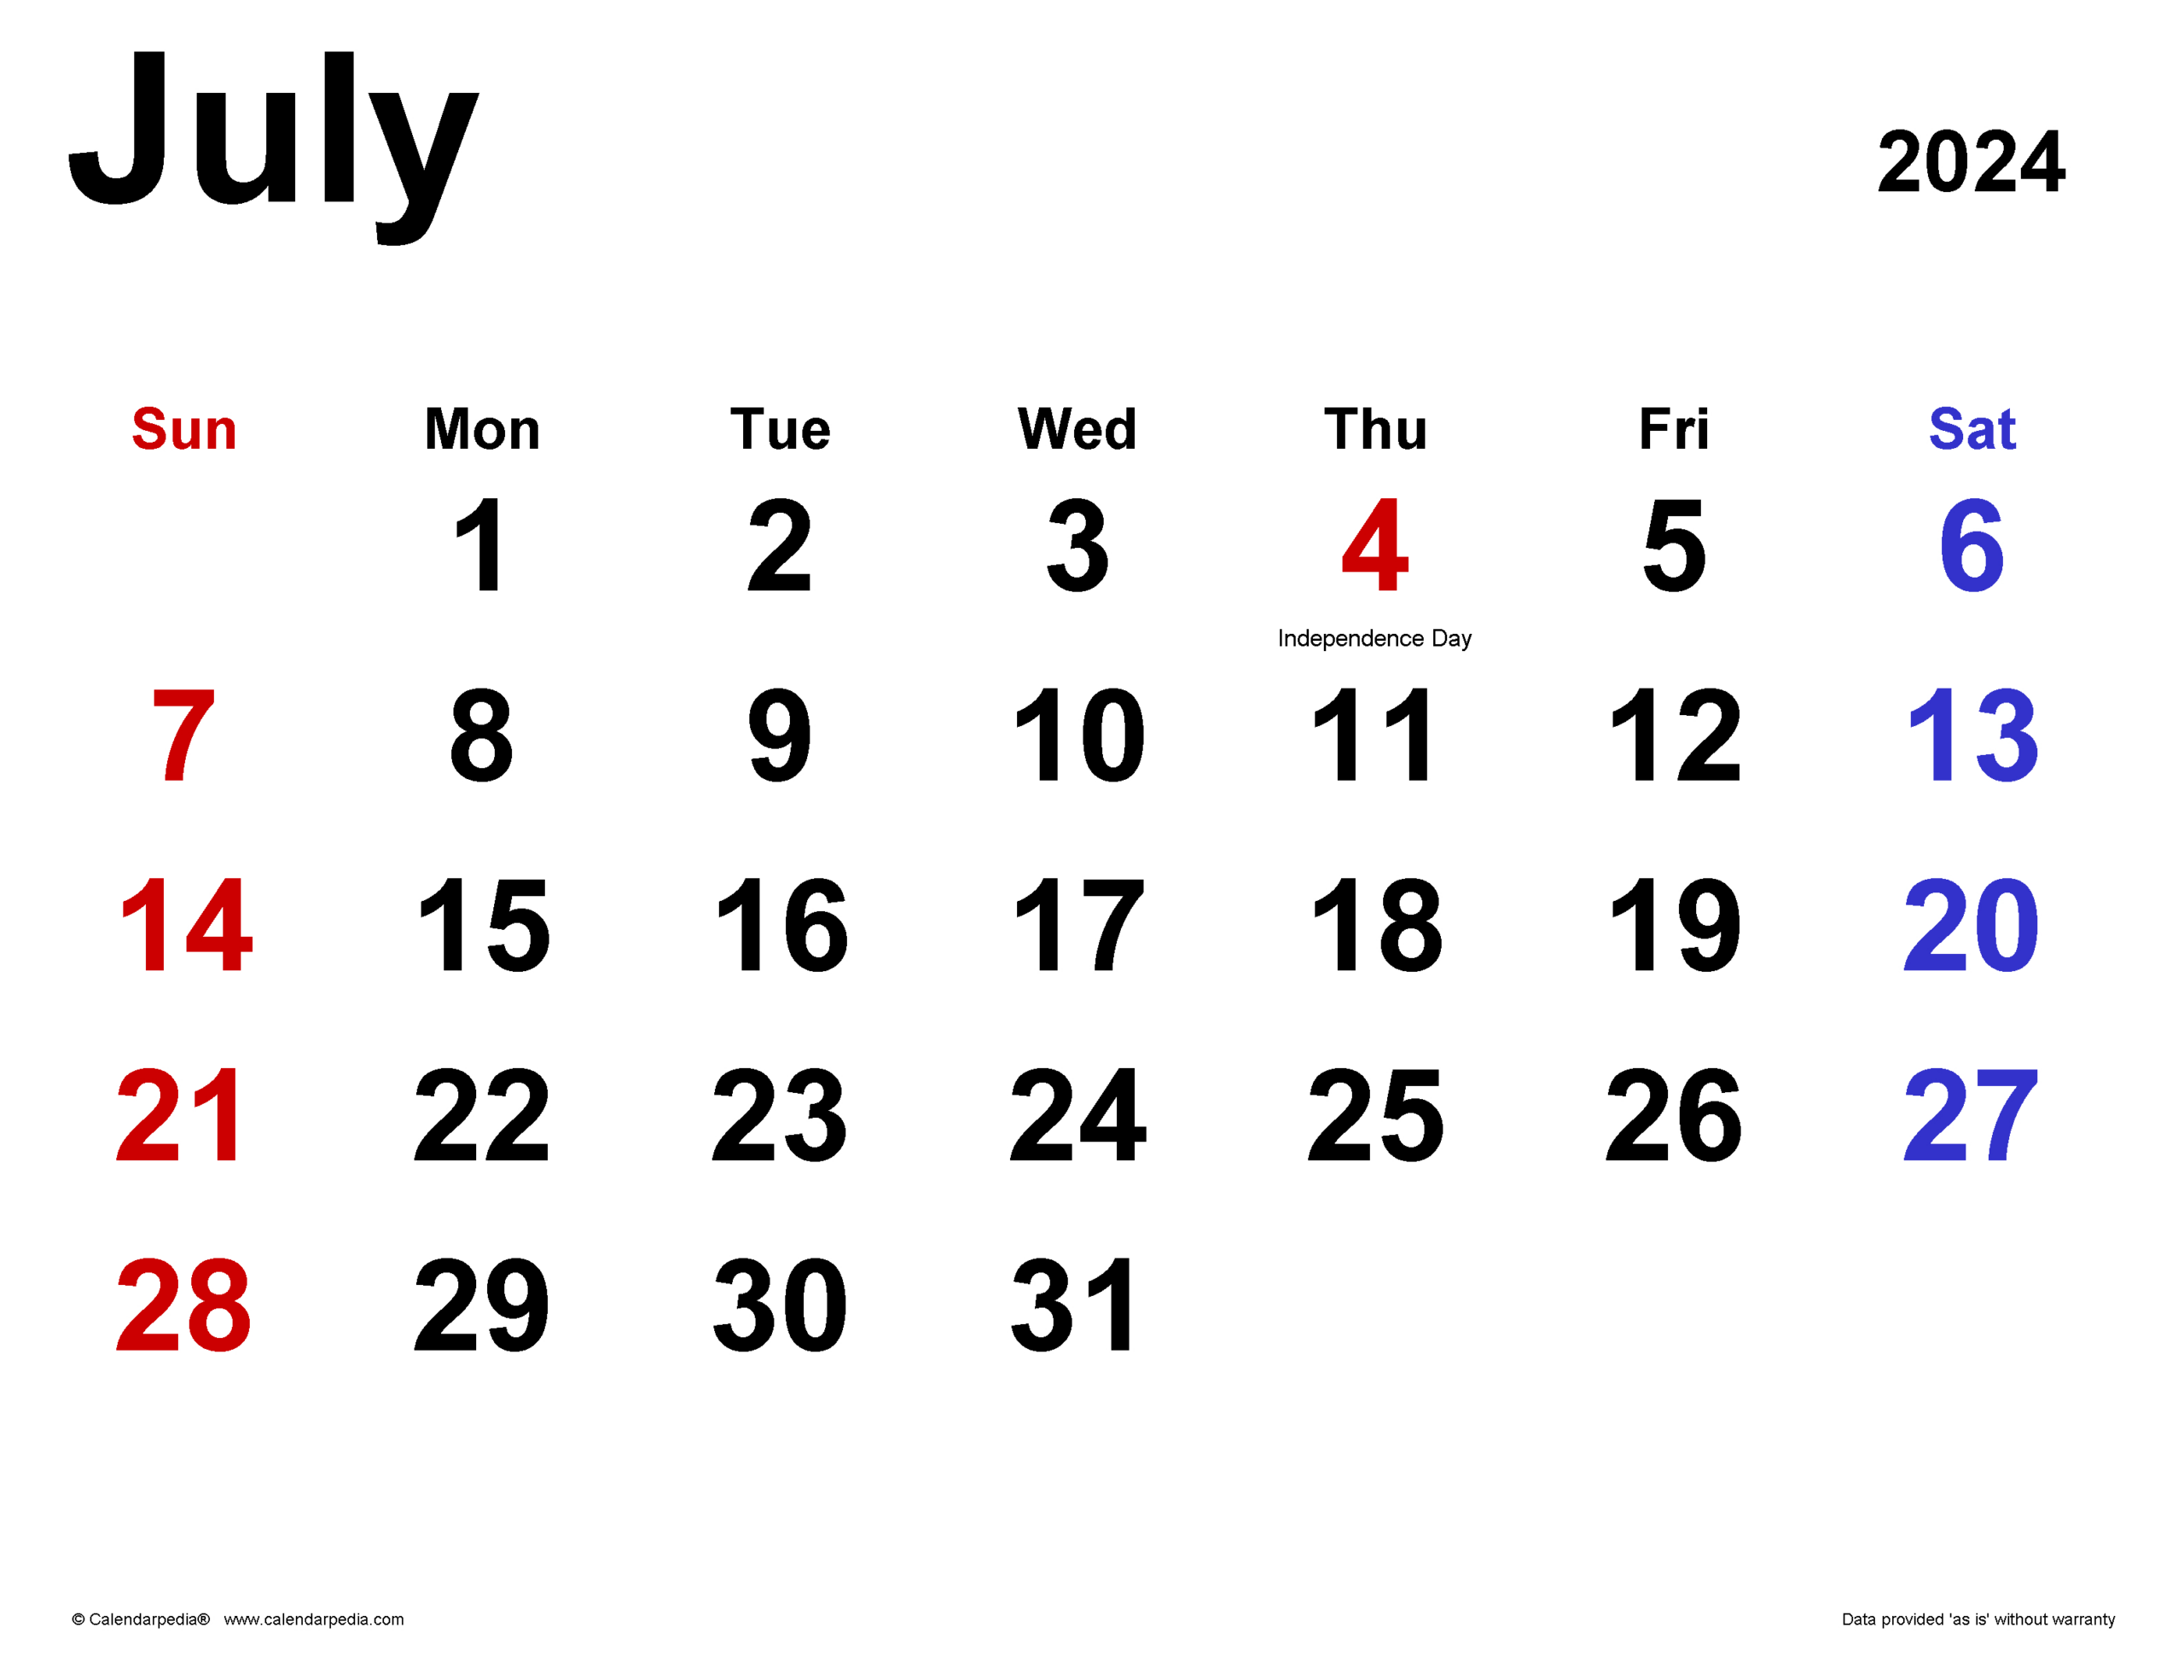 July 2024 Calendar | Templates For Word, Excel And Pdf intended for Daily Calendar 2024 July